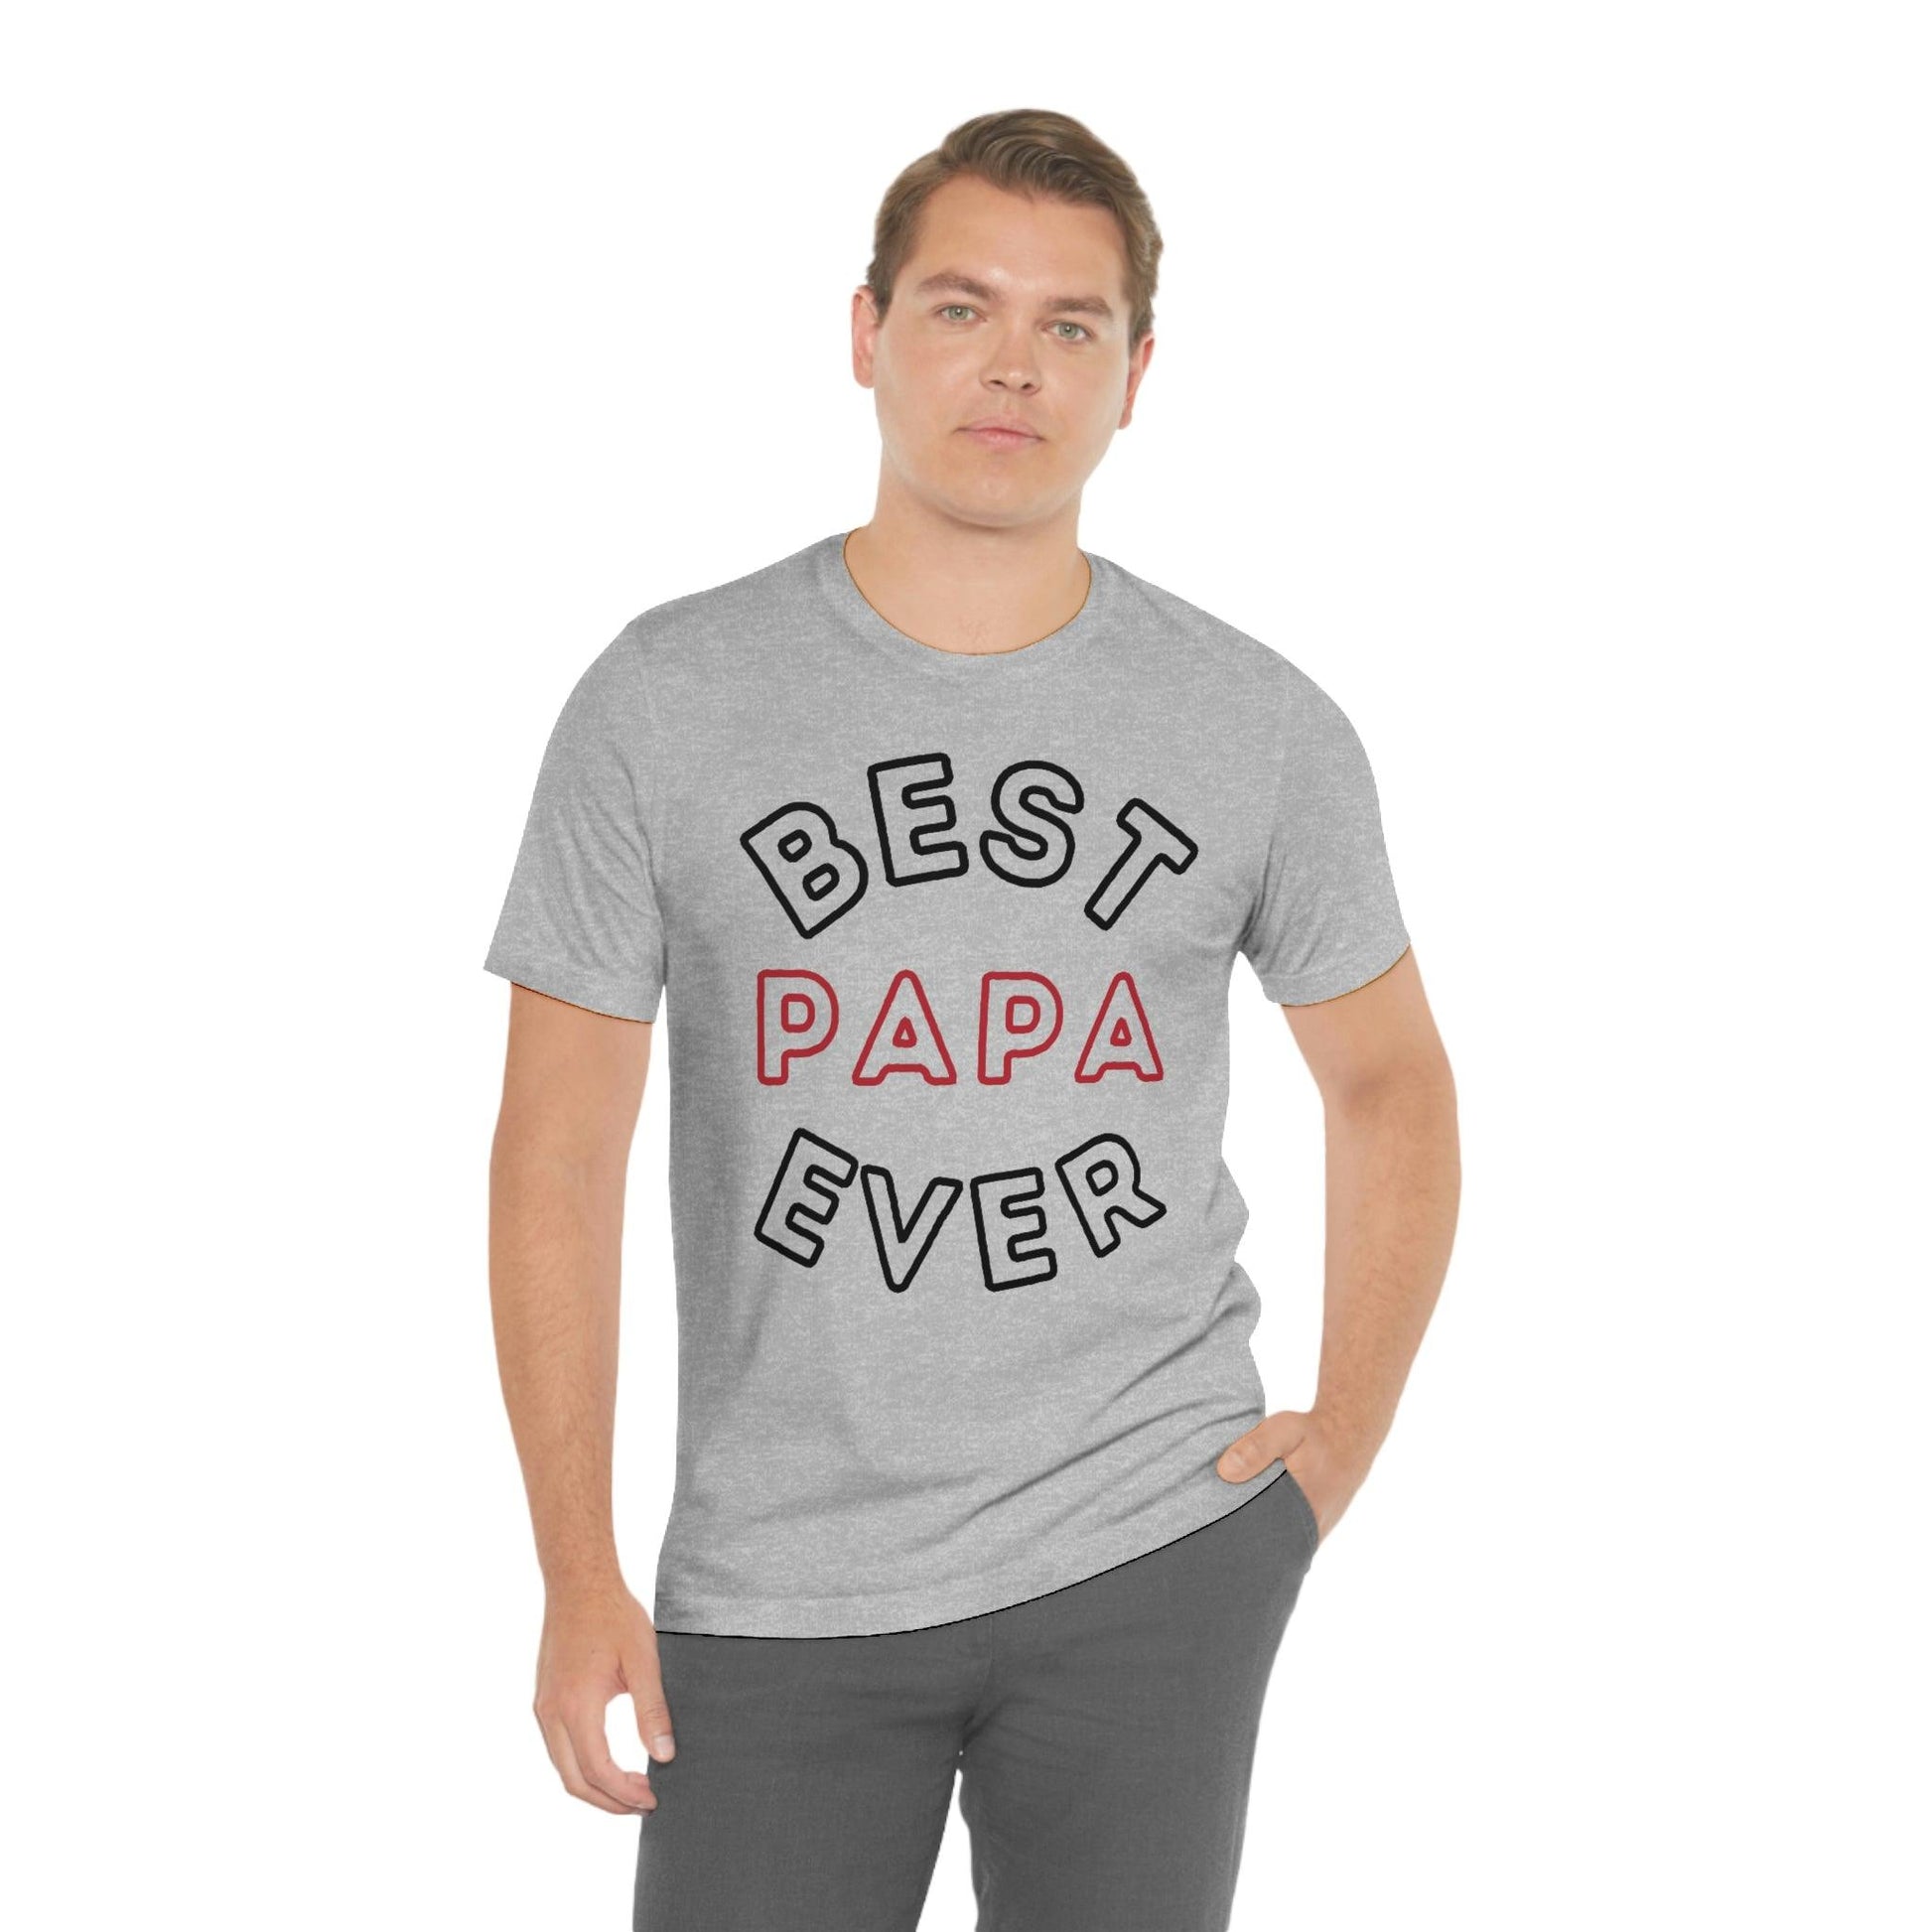 Dad Gift - Best Dad Gift - Best Papa Ever Shirt - Dad Shirt - Funny Fathers Gift - Husband Gift - Funny Dad Tshirt - Dad Birthday Gift - Giftsmojo